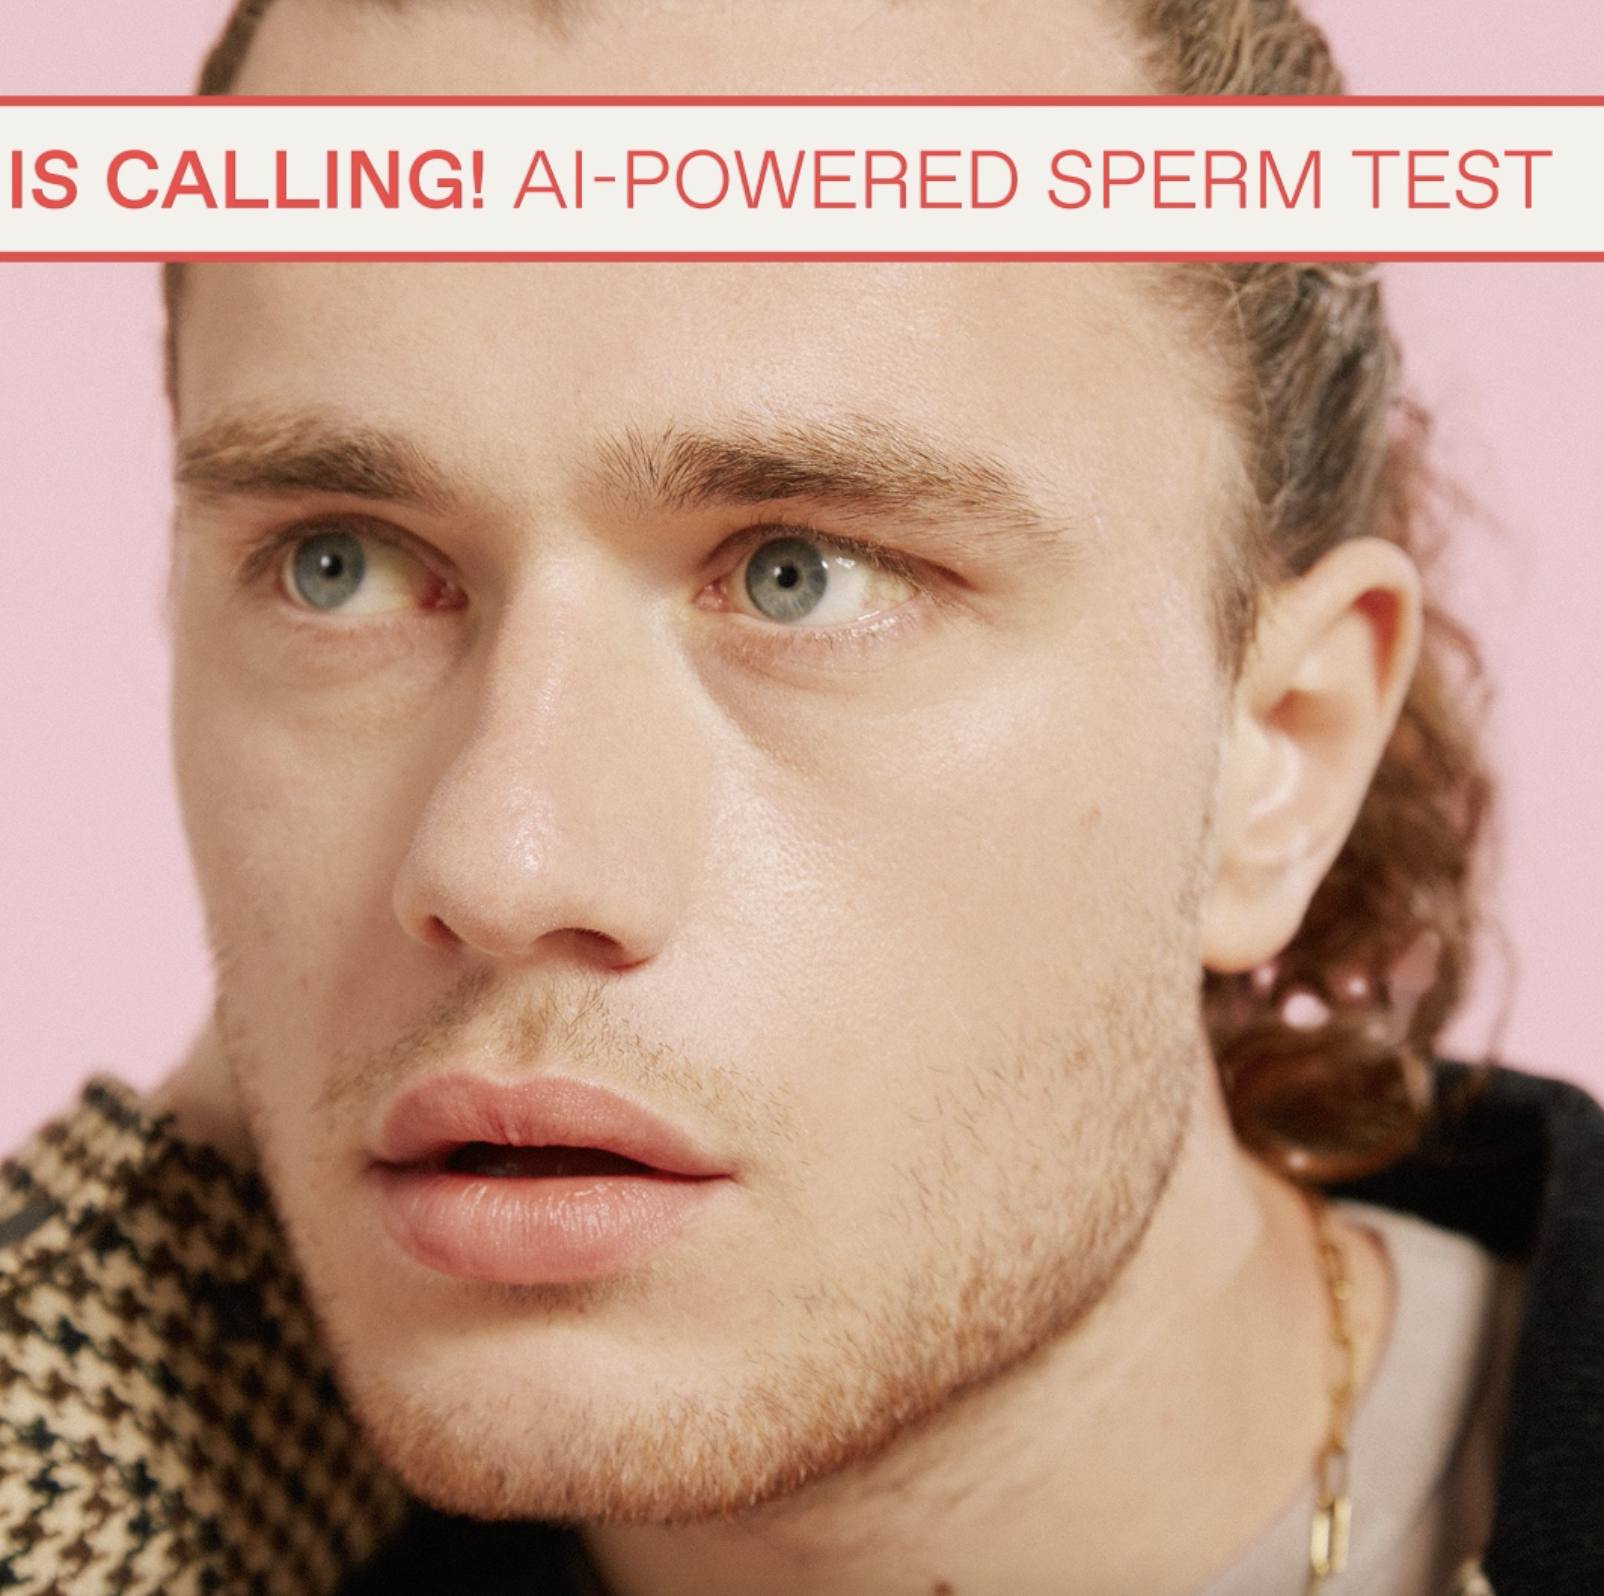 Screenshot from one of Mojo's banned Facebook adverts. Text reads &quot;London is calling! AI-powered sperm test&quot;